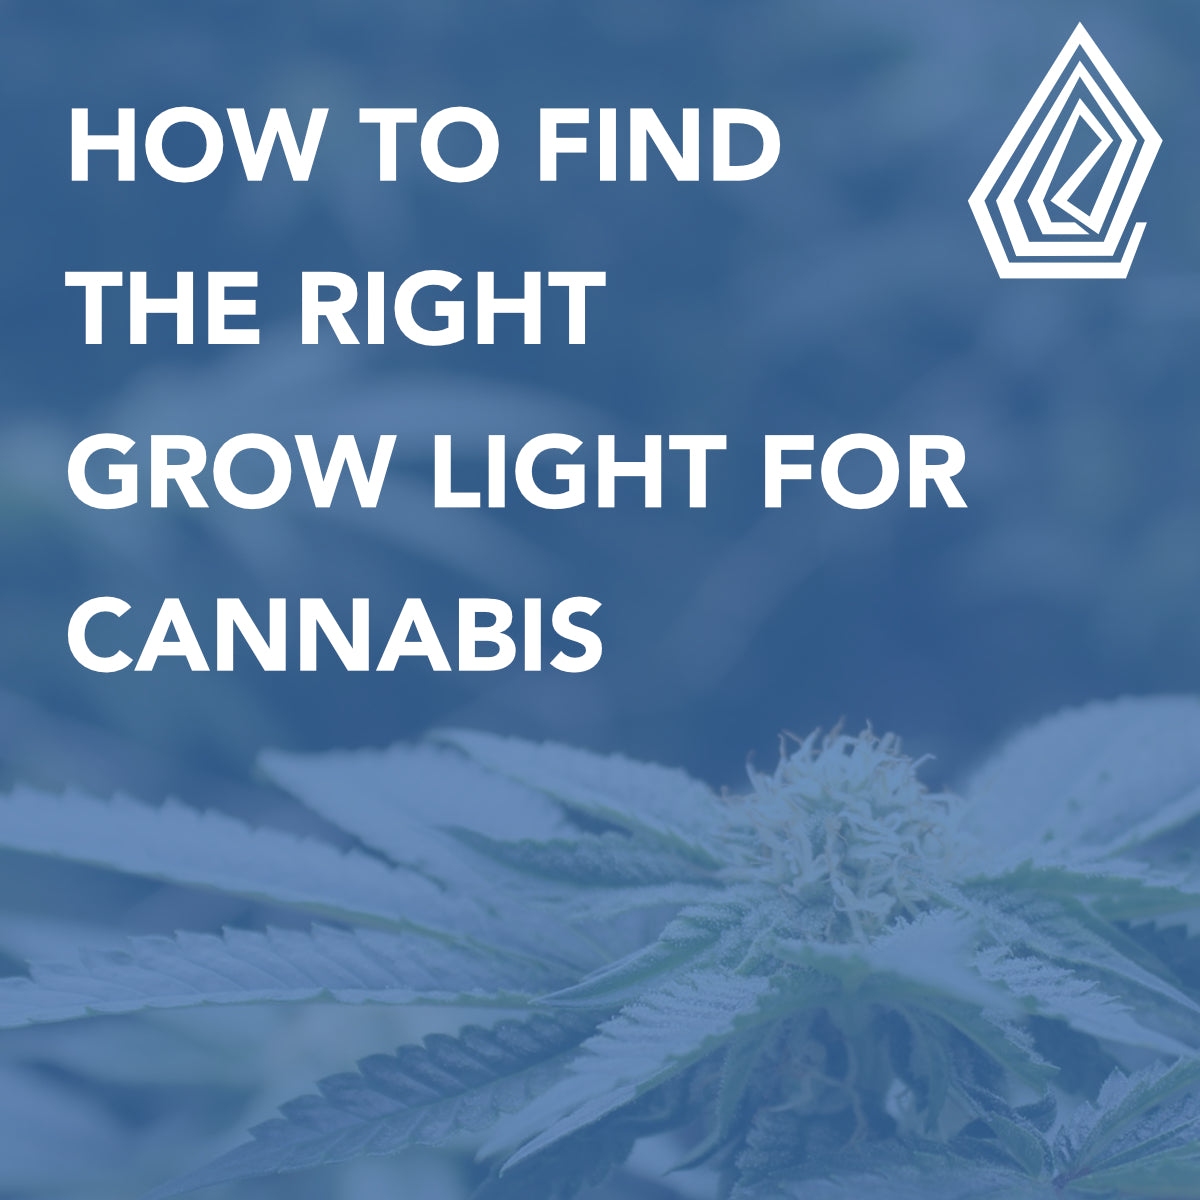 How to Find the Right Grow Light for Cannabis Growth